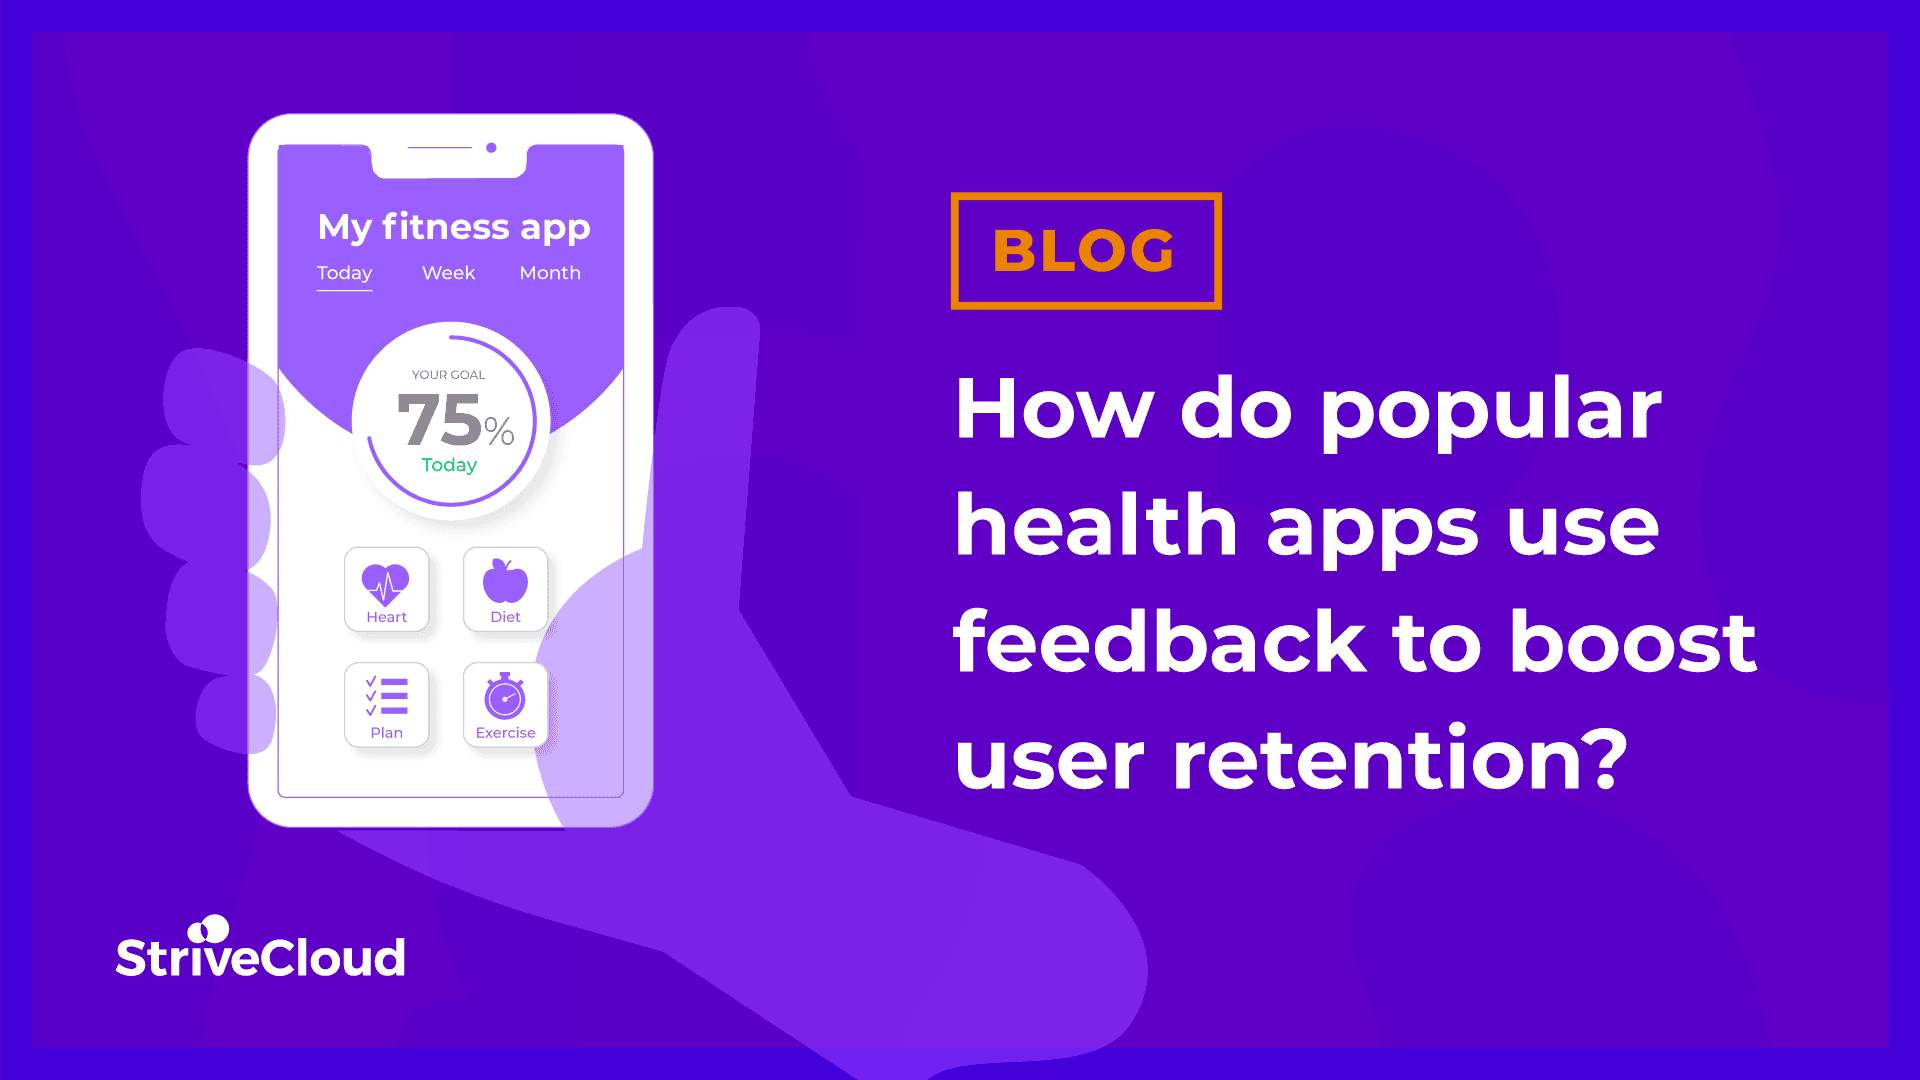 How do popular health apps use feedback to boost user retention?